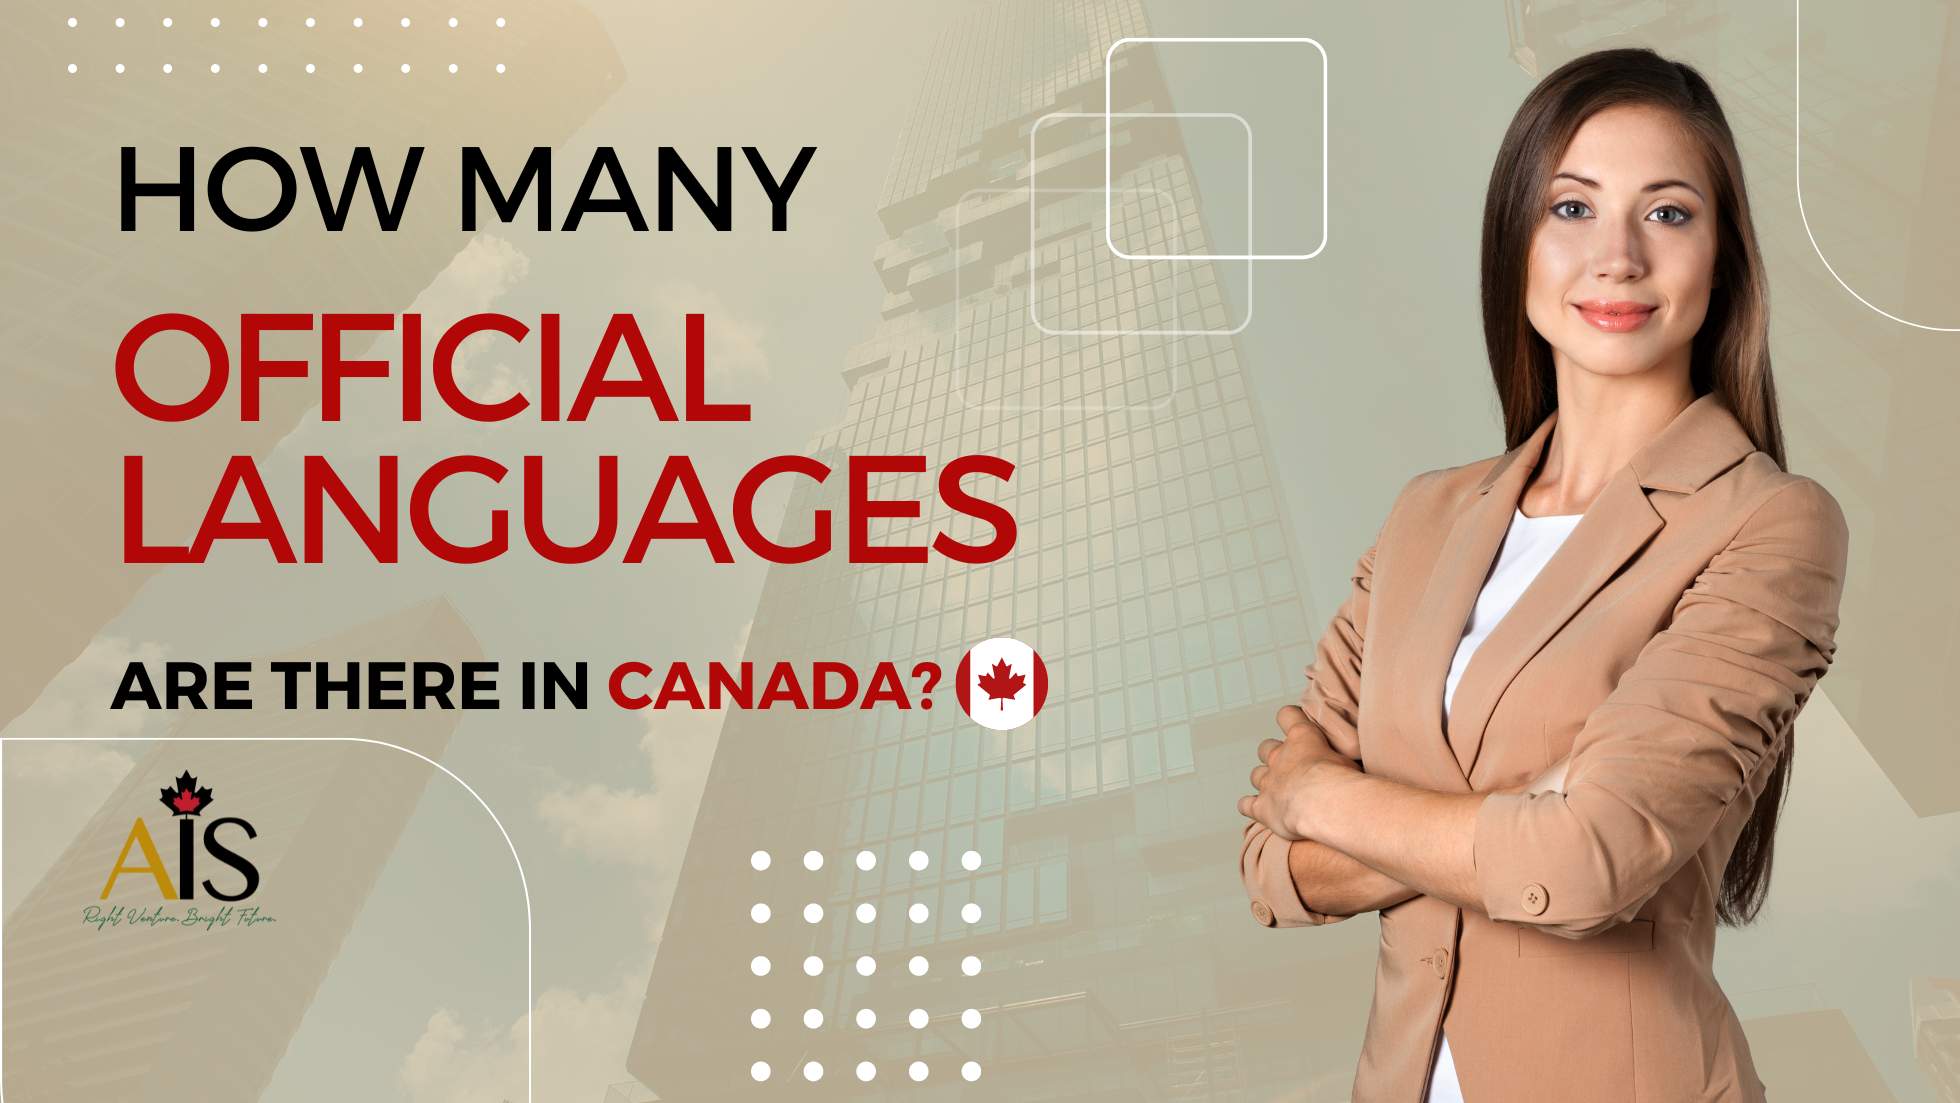 How many official languages are there in Canada?